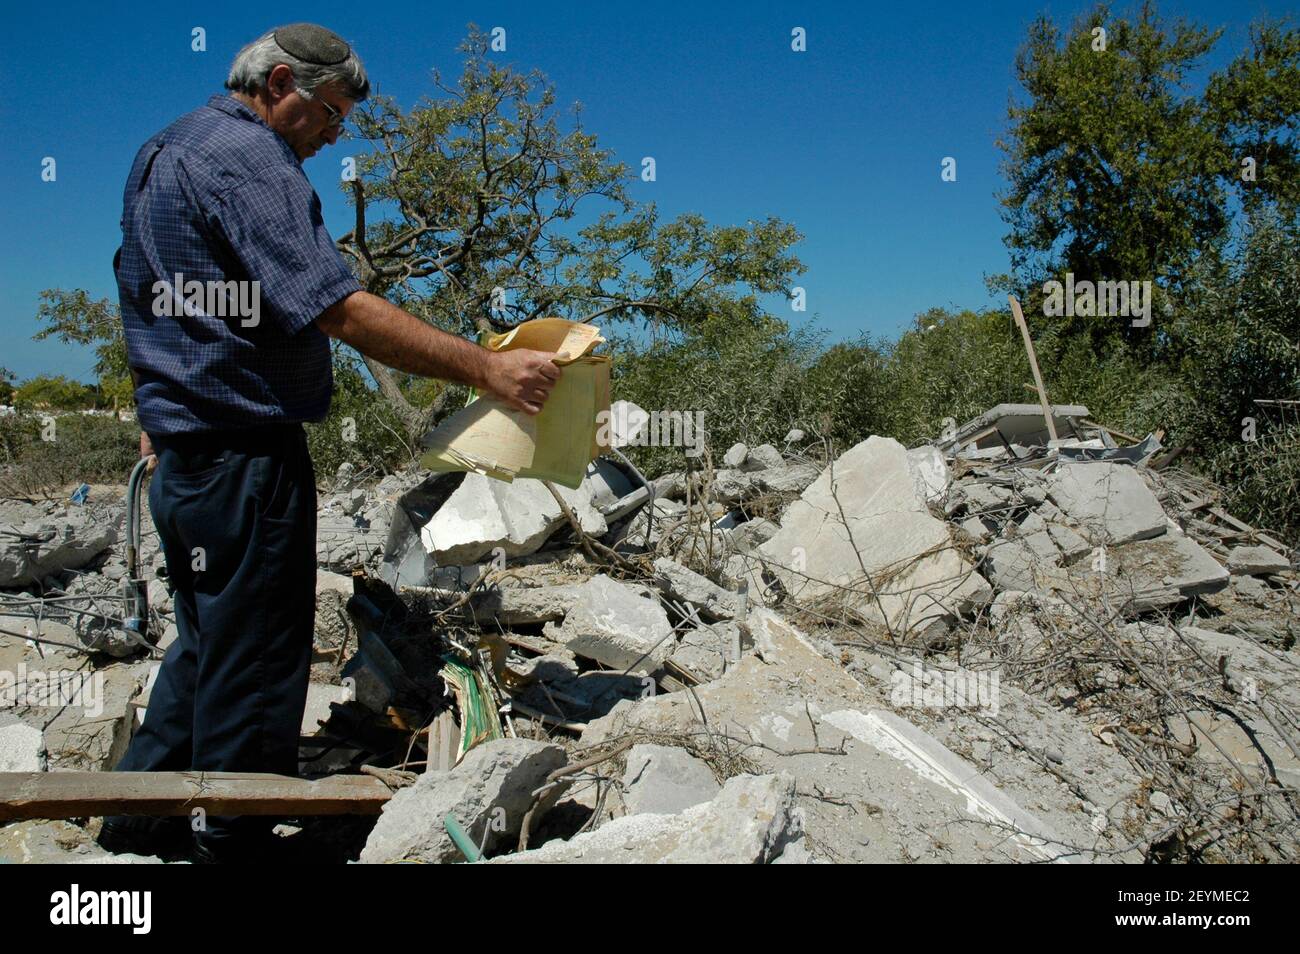 An Israeli man search through mounds of rubble of demolished houses in what used to be the Jewish settlement of Neve Dekalim in Gaza Strip on 06 September 2005. Israel completed the evacuation of all 8,000 Jewish settlers from Gaza and several hundred more from four enclaves in the northern West Bank, after nearly 40 years of occupation. Stock Photo